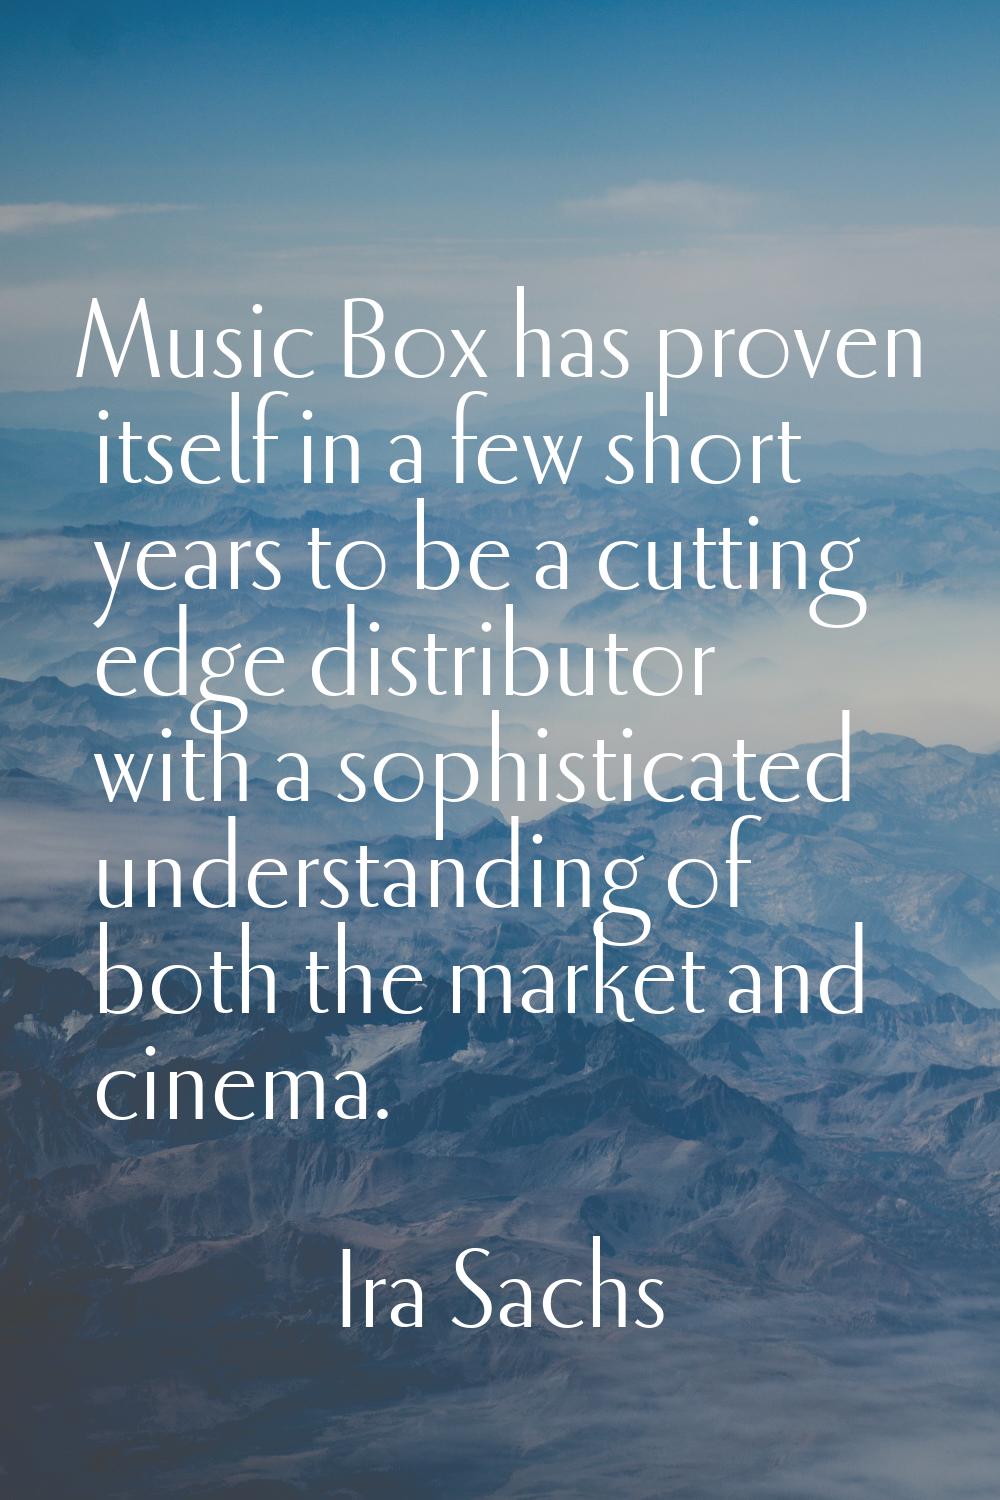 Music Box has proven itself in a few short years to be a cutting edge distributor with a sophistica